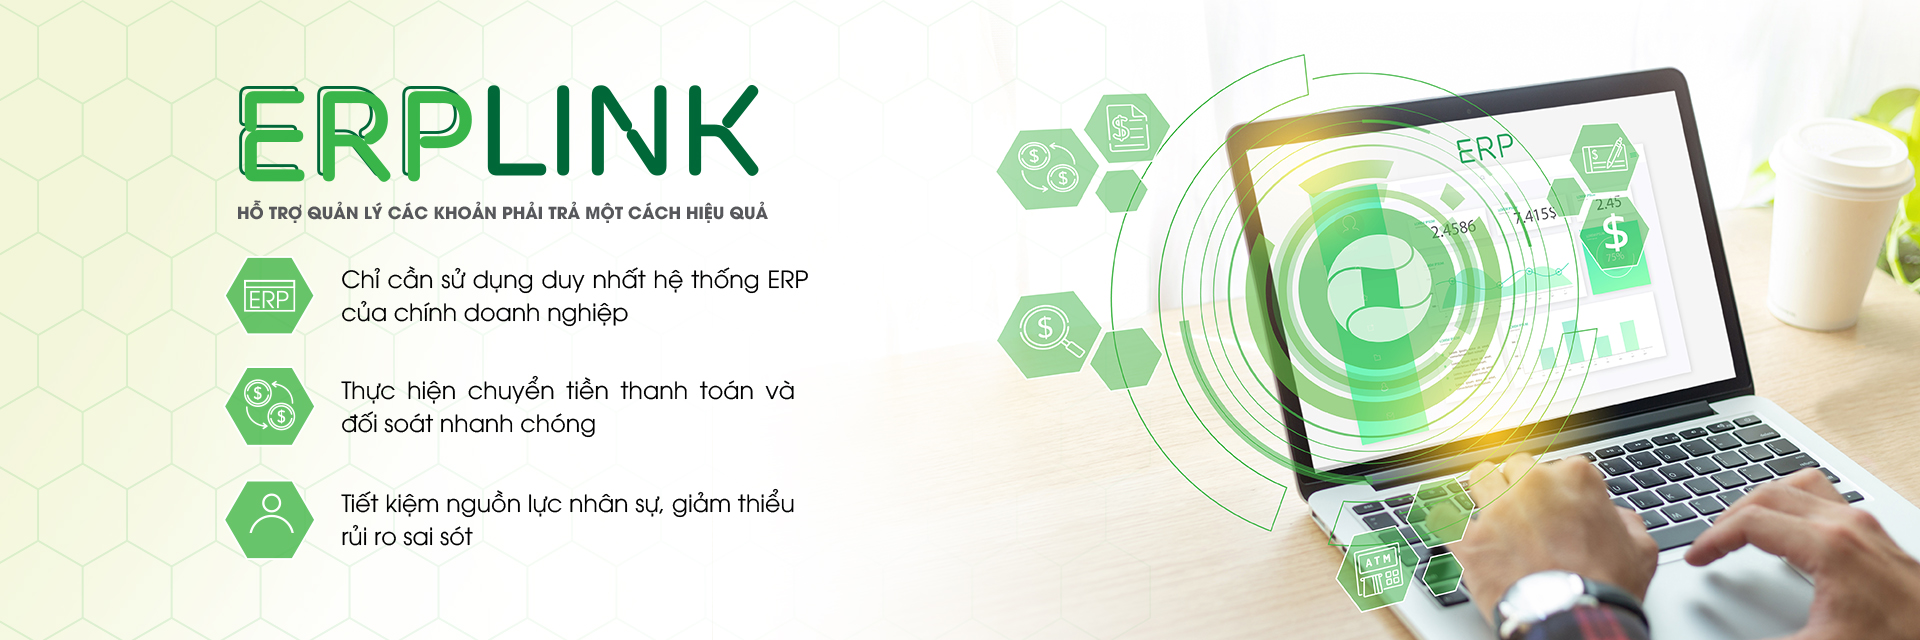 Dịch Vụ ERP Link 